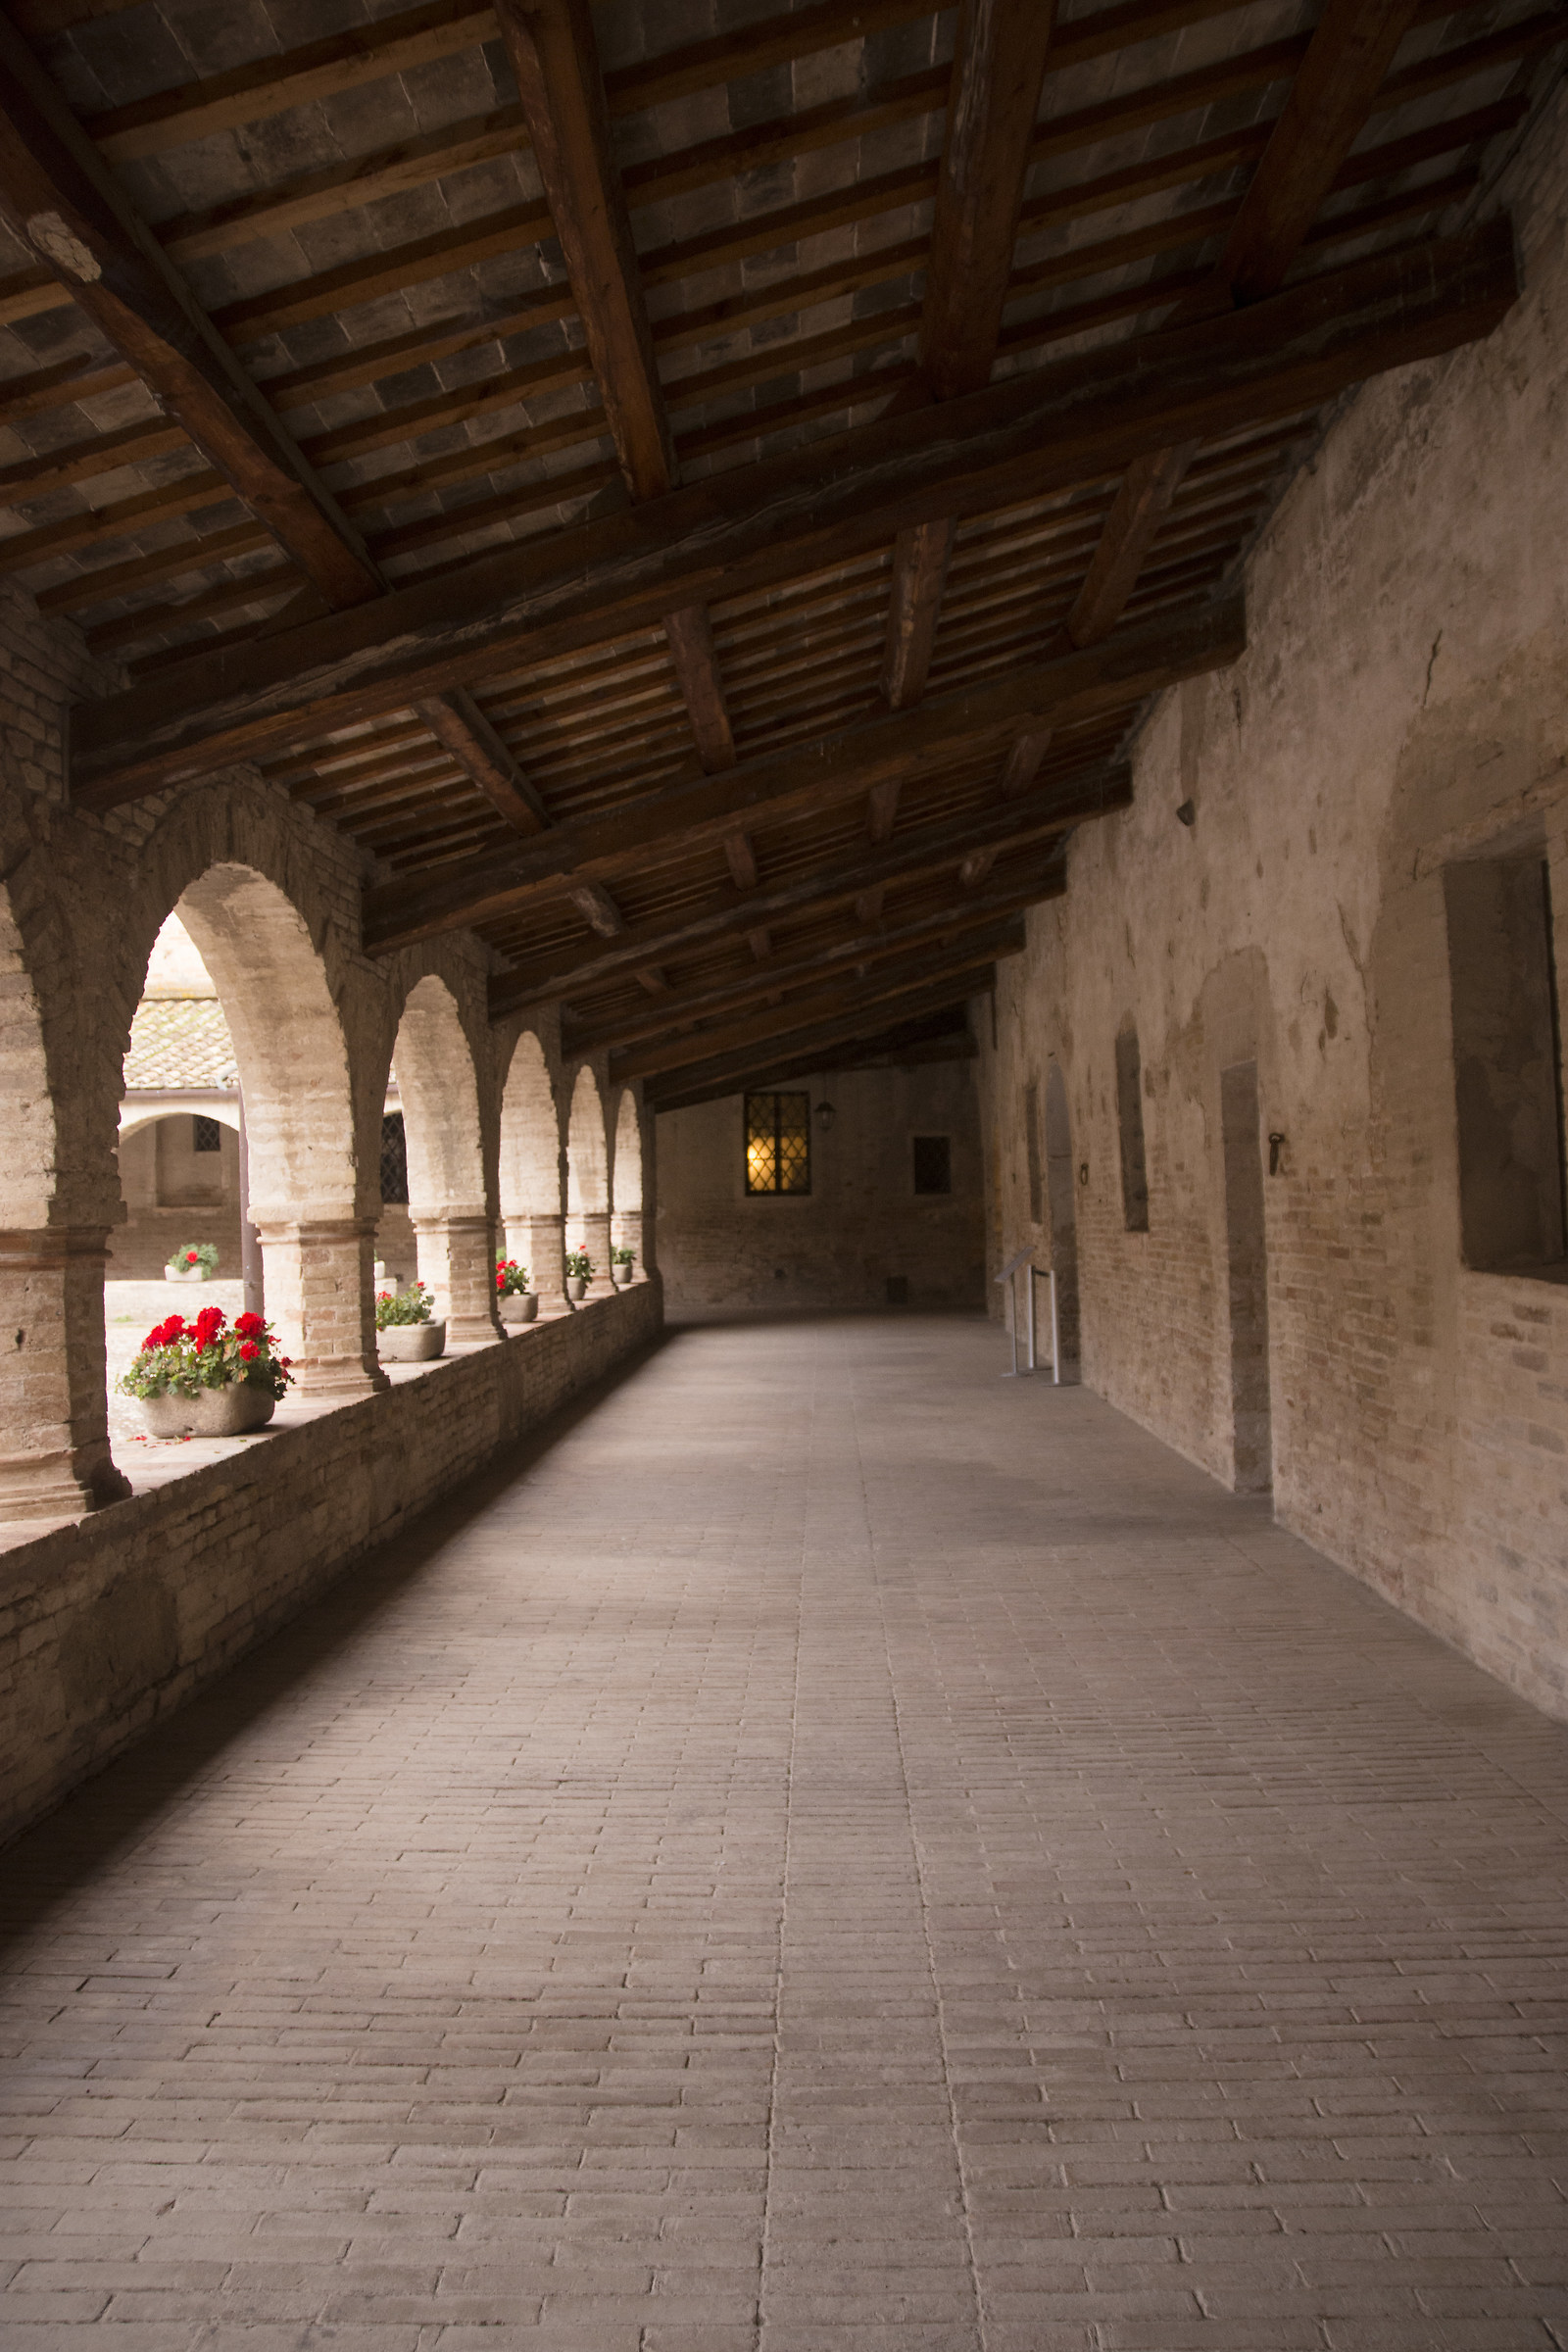 Peace of the cloister...